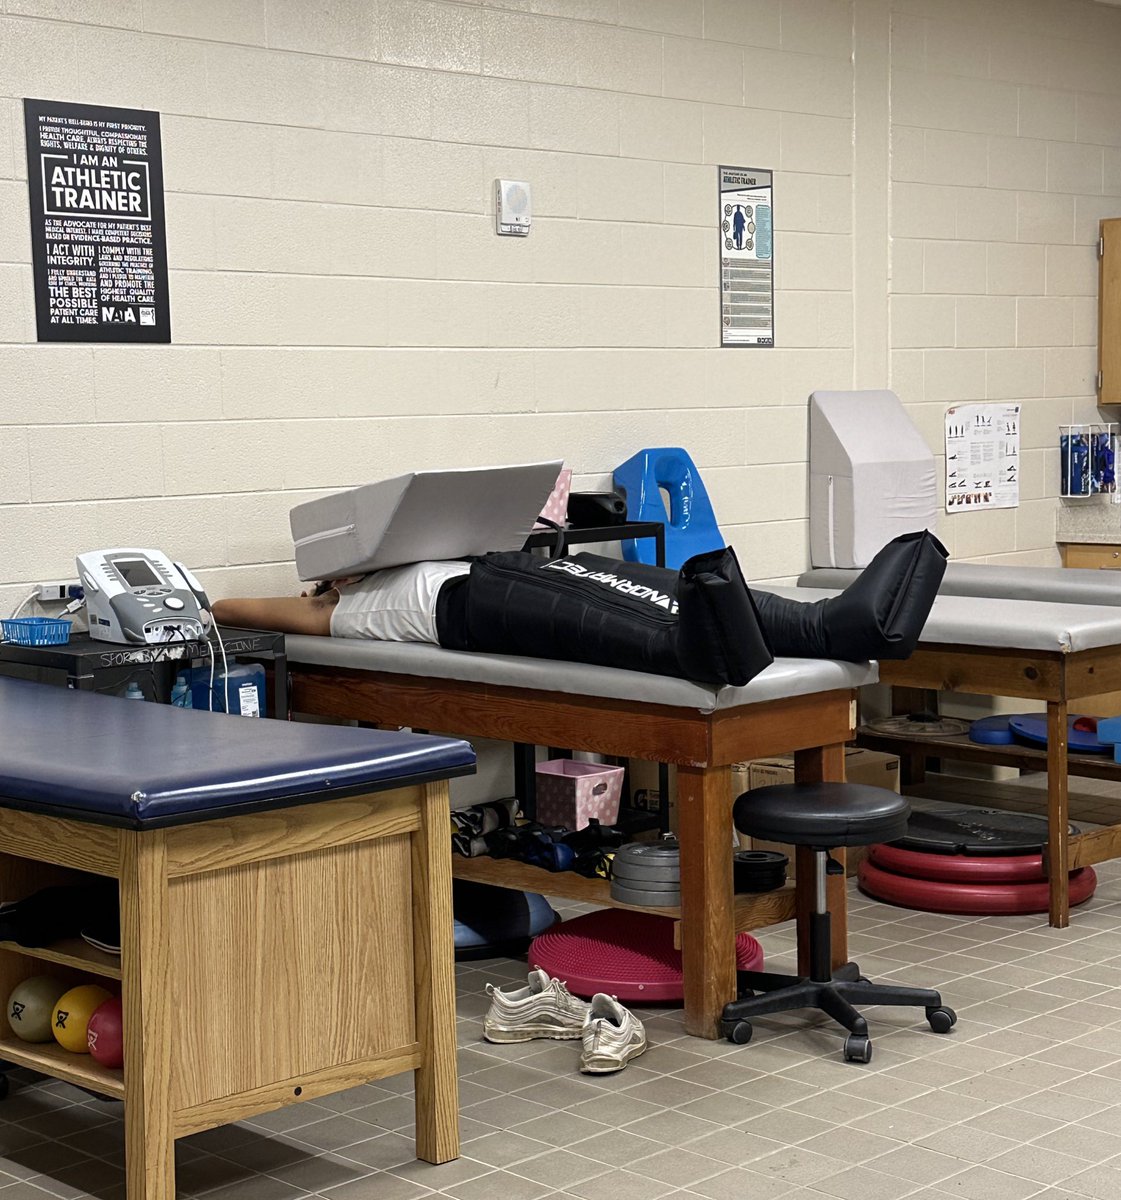 This is what we call recovery... #sleepisimportant #normatec #recovery #kickers #Zzzz